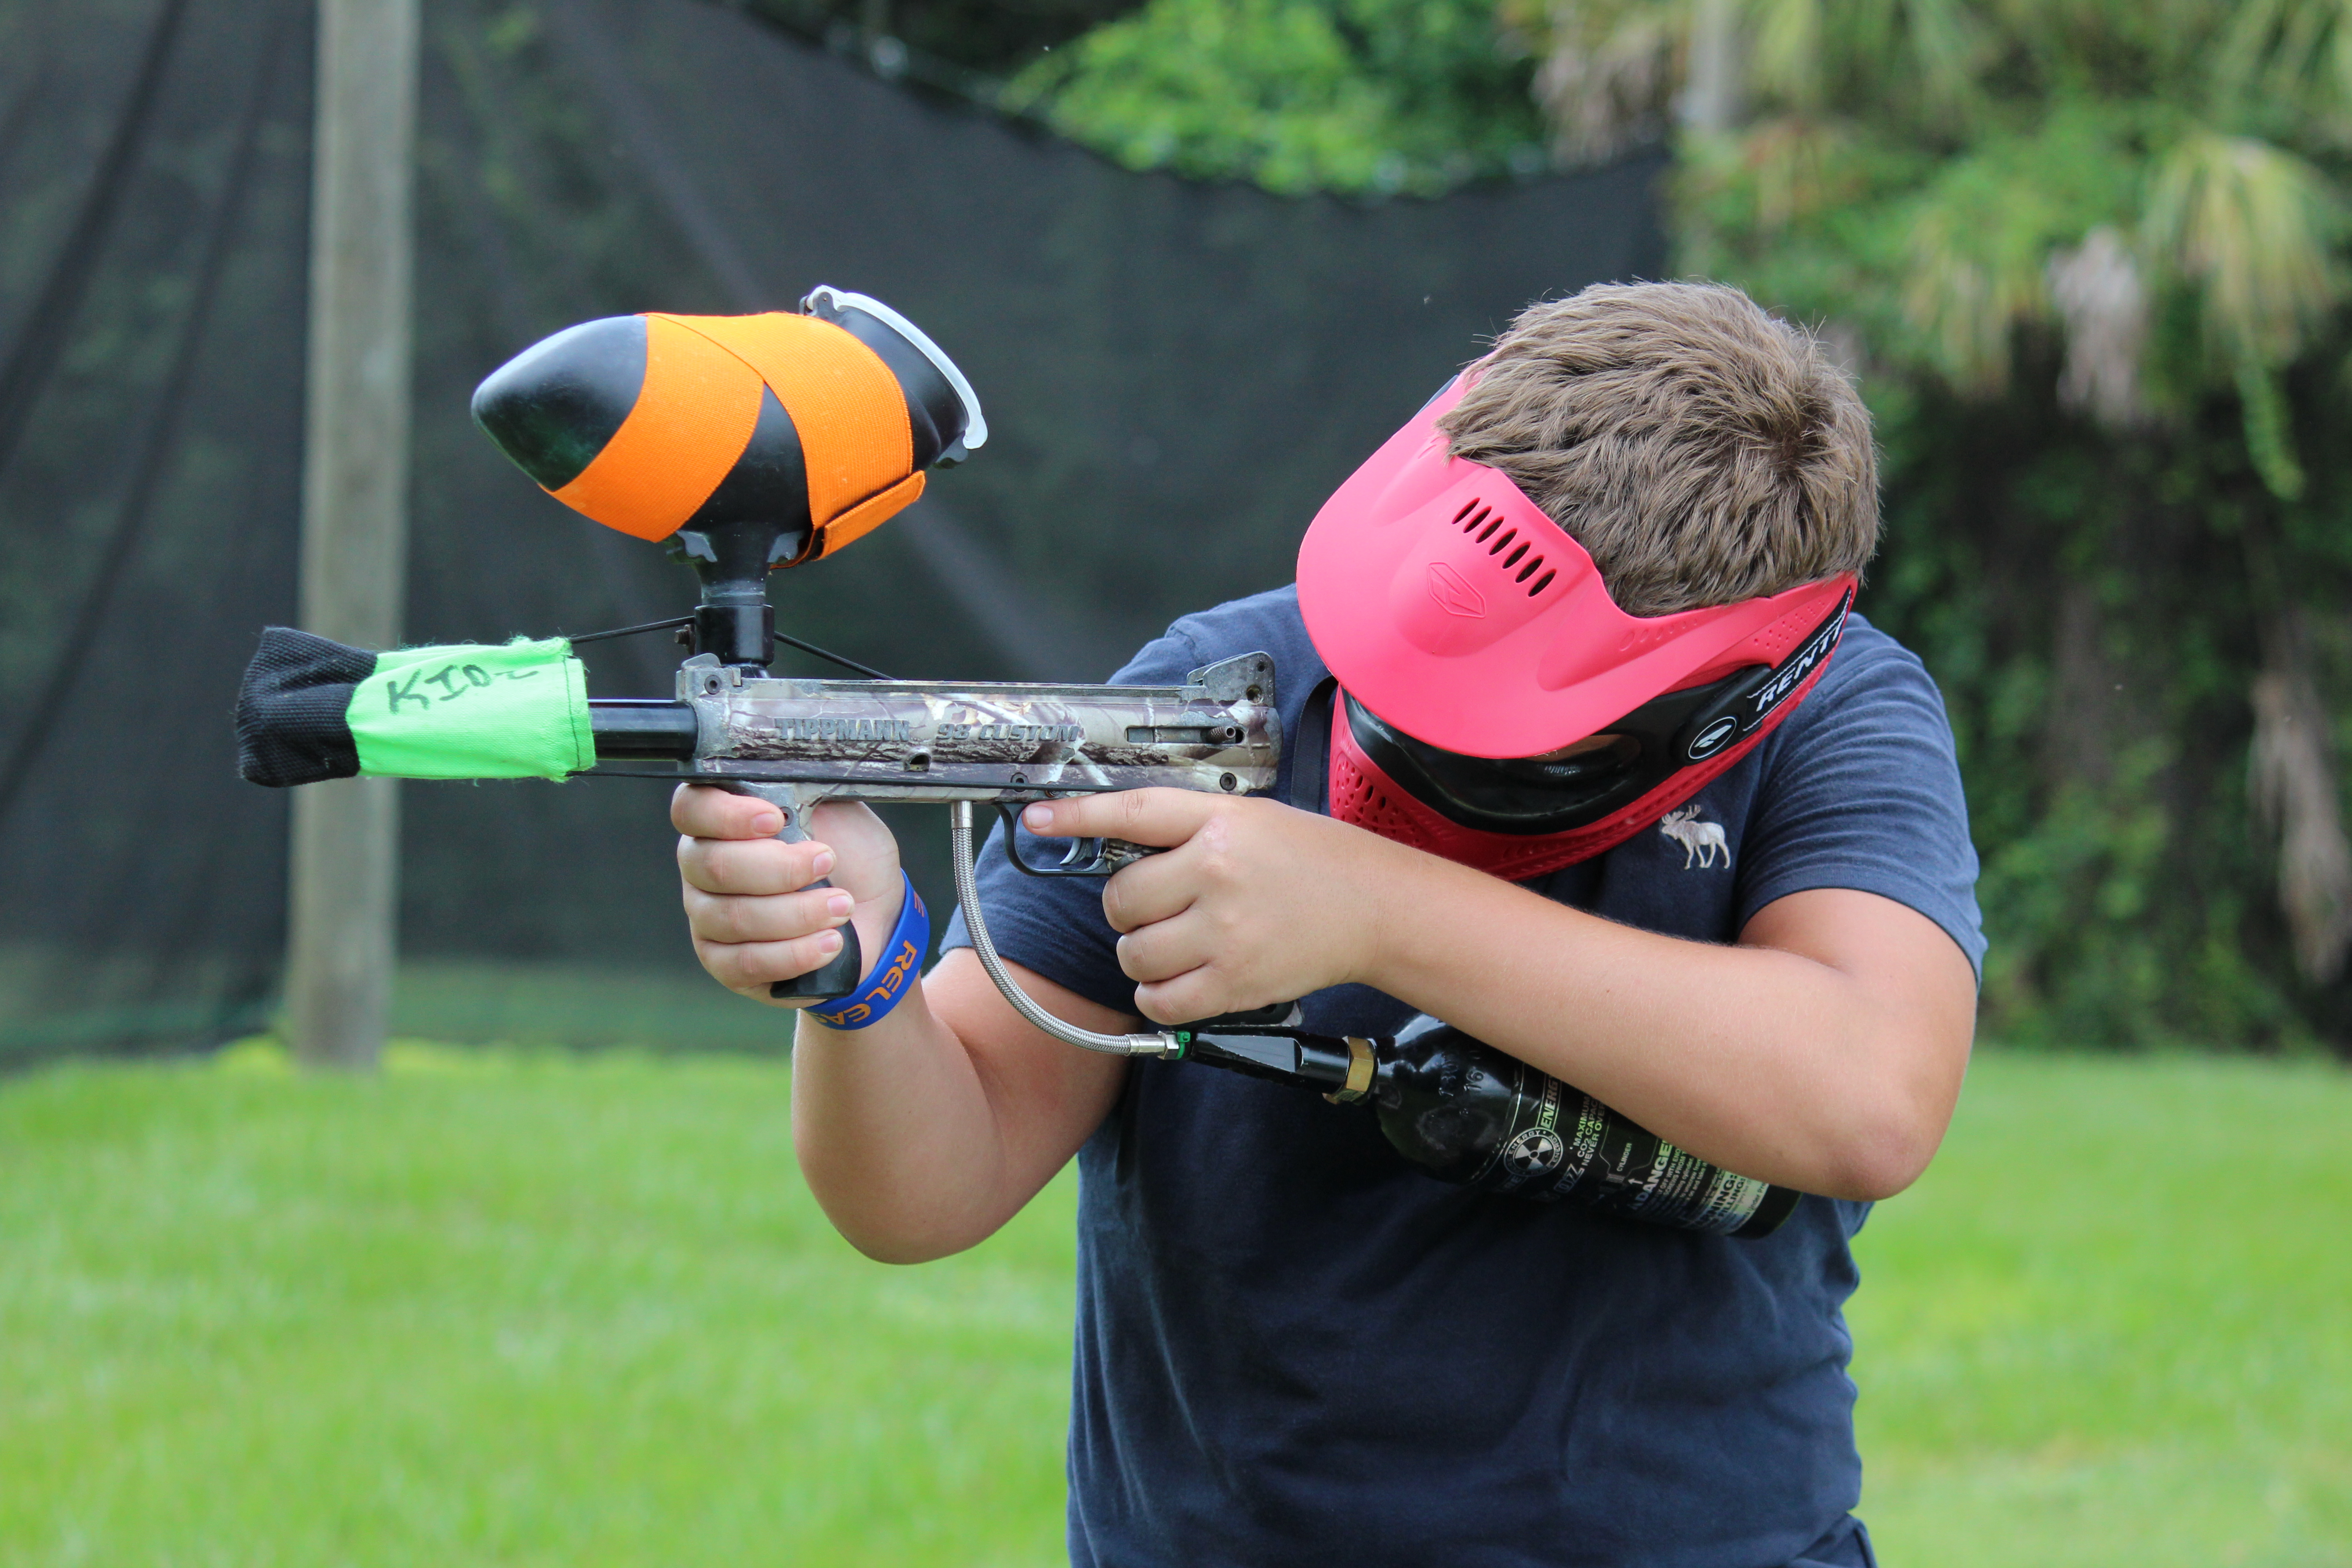 Camper takes aim with paintball gun